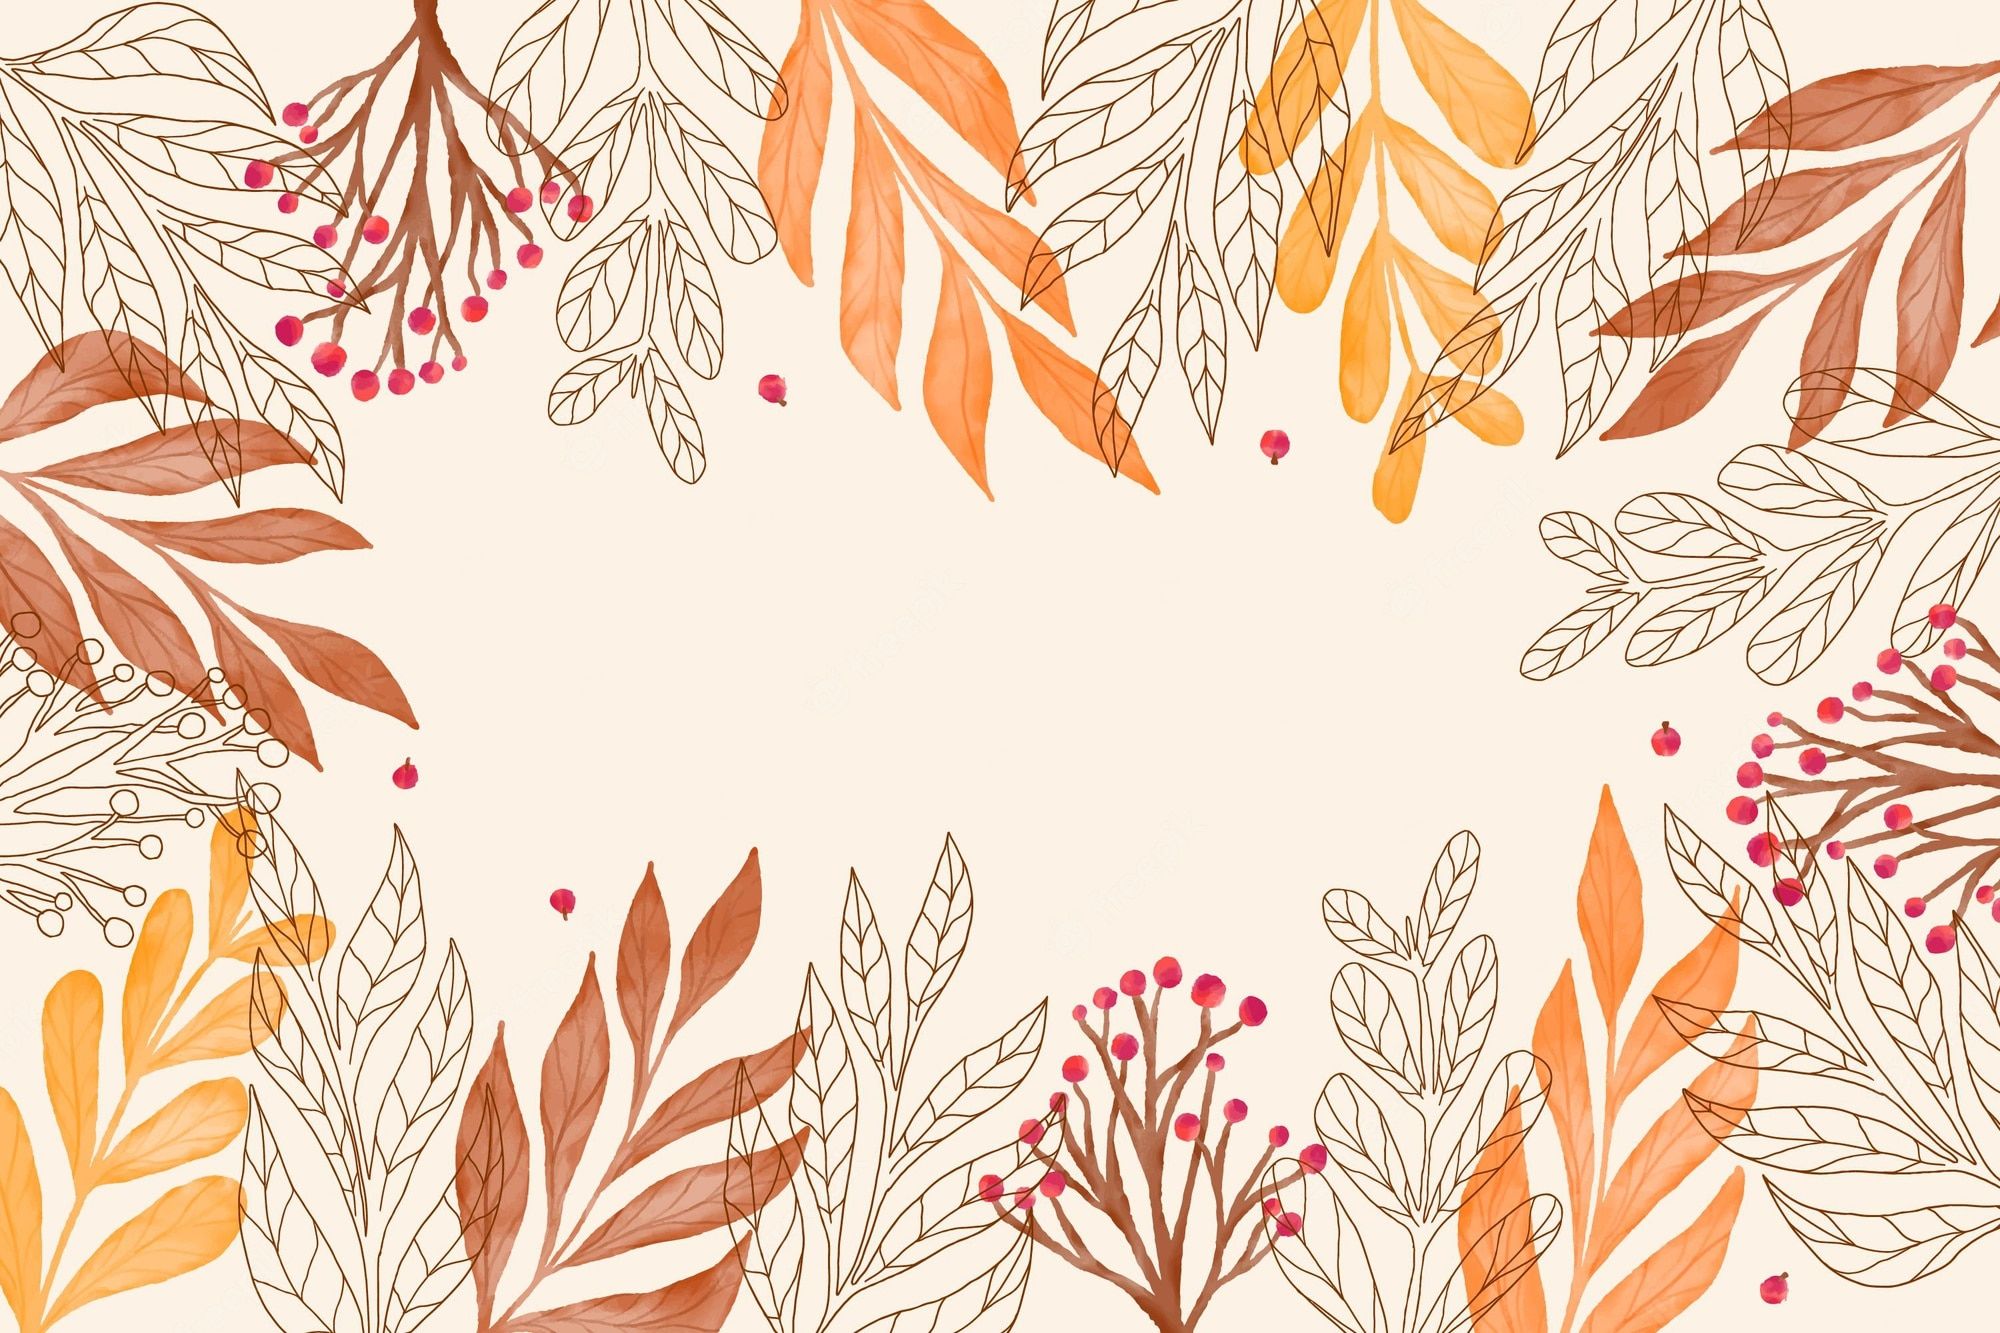 A beige background with orange and brown leaves and berries on the edges - Cute fall